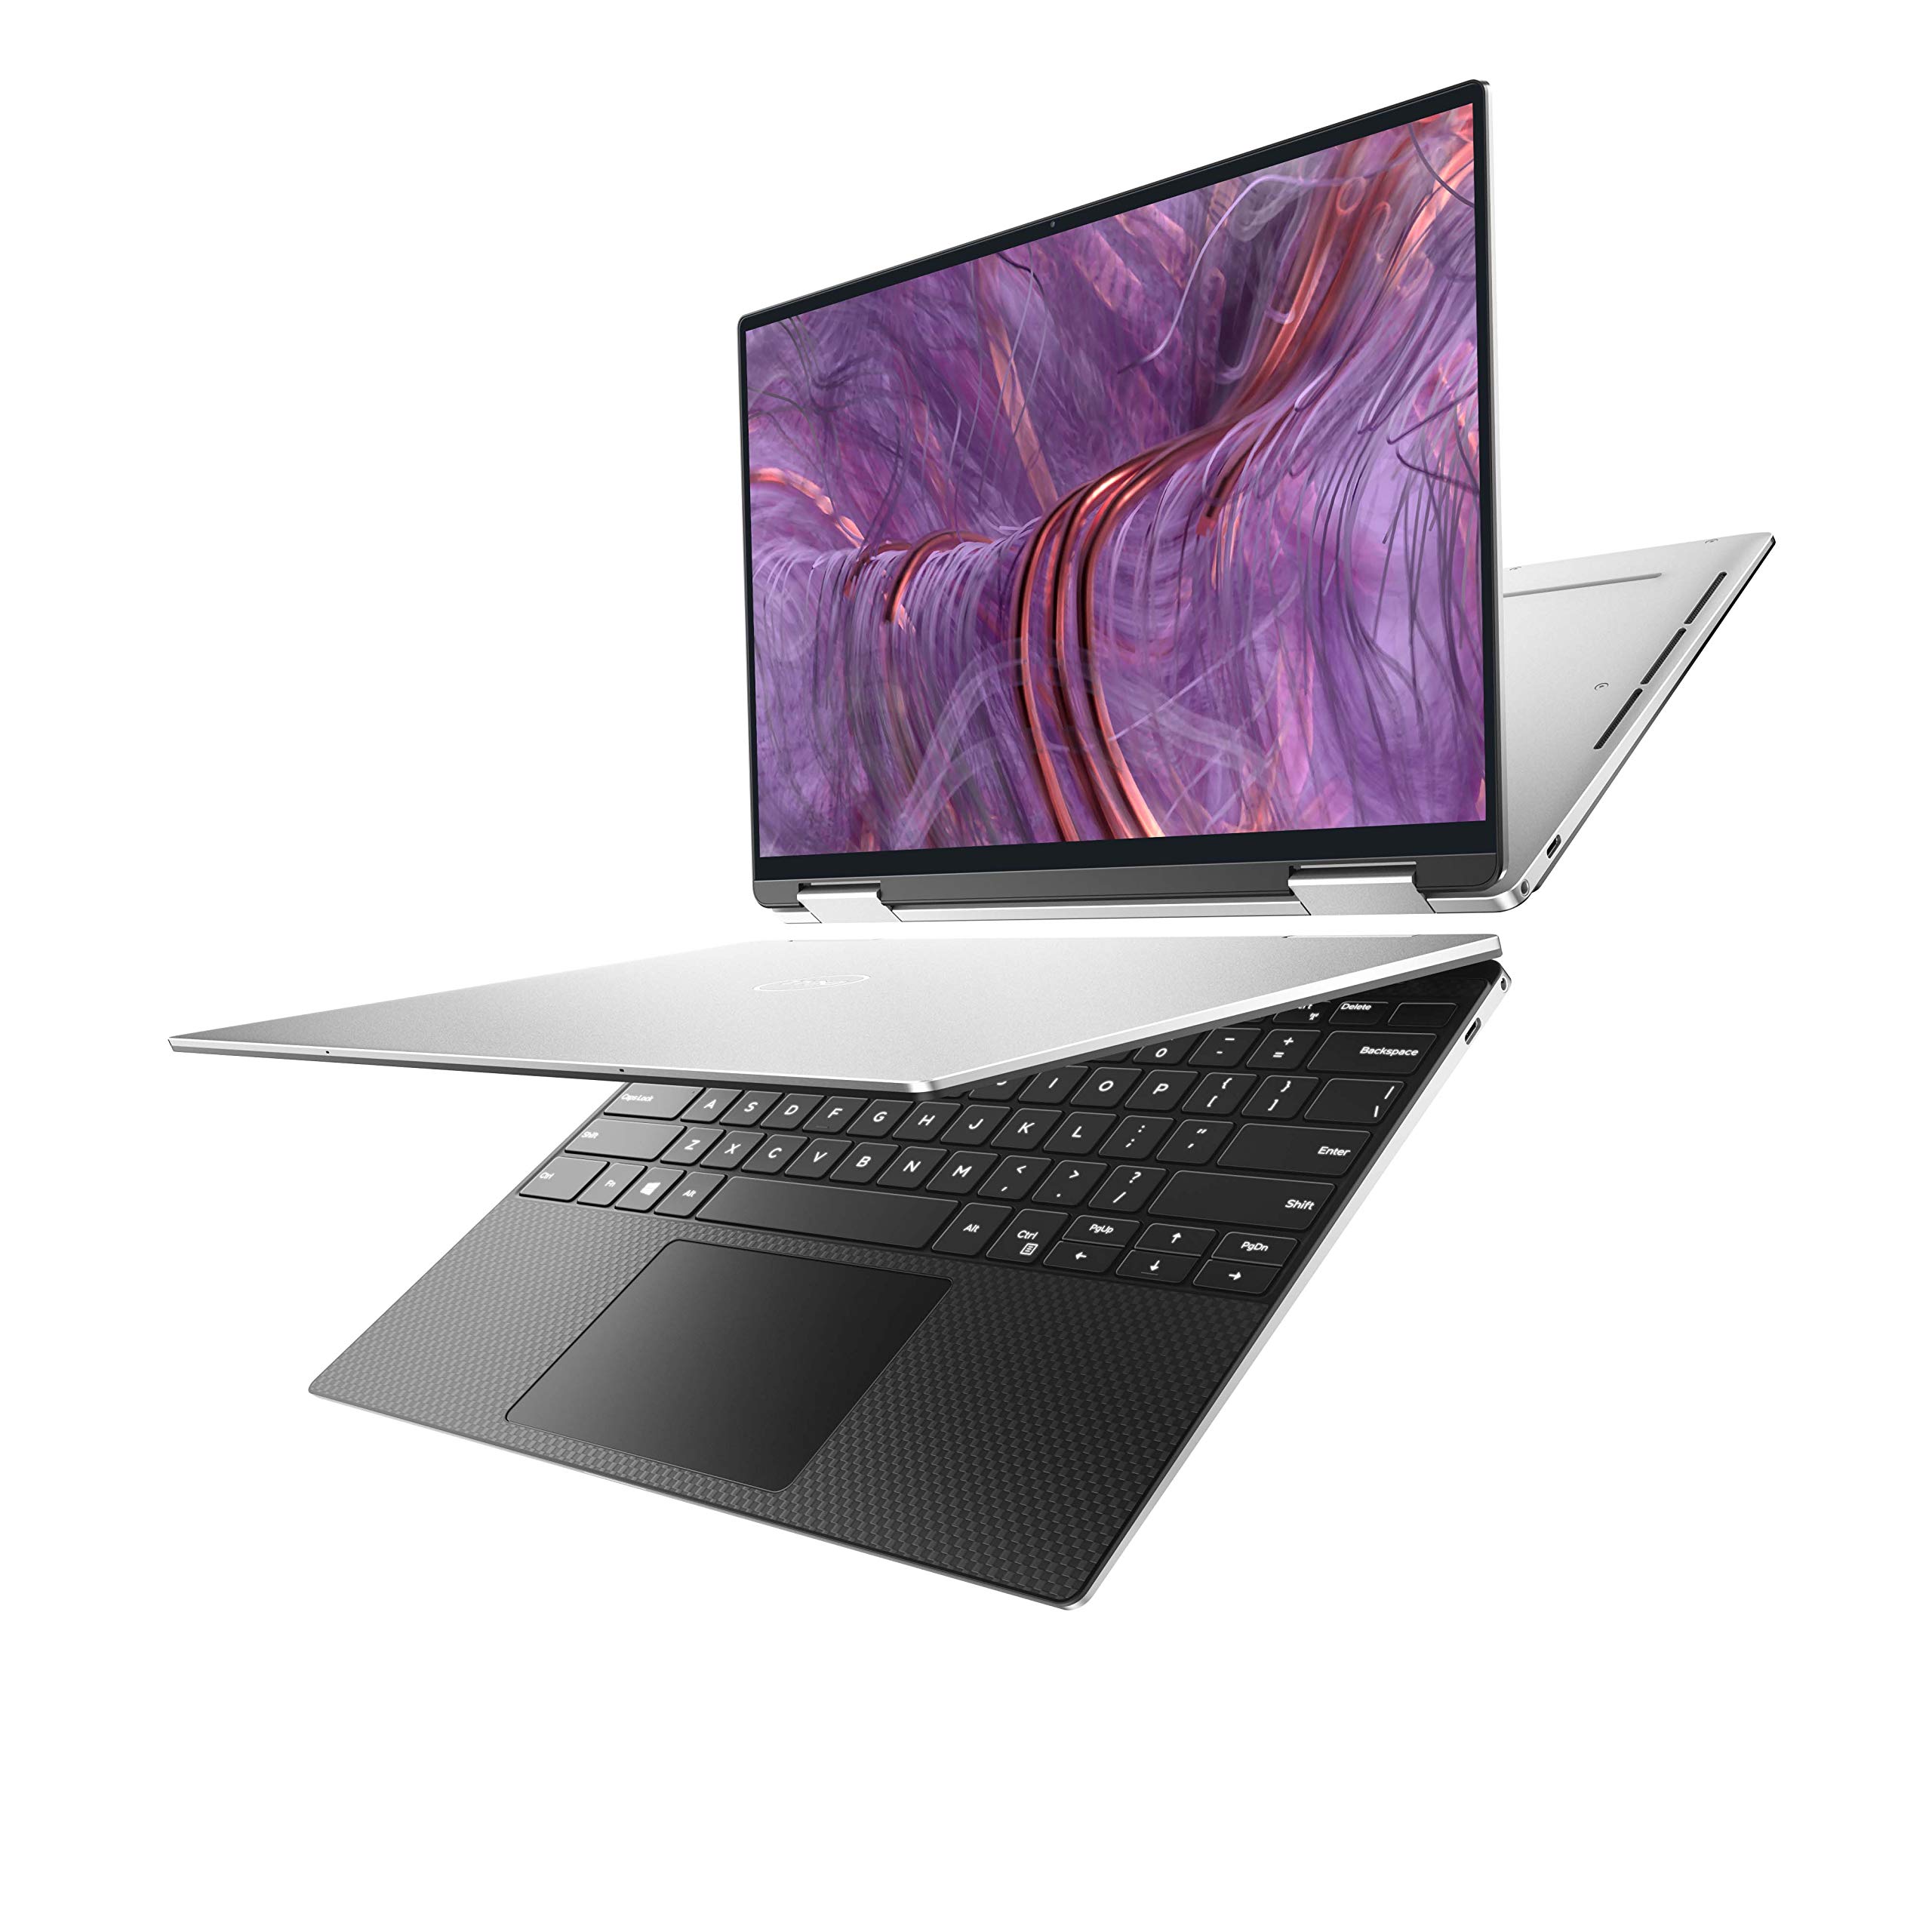 Dell 9310 XPS 2 in 1 Convertible, 13.4 Inch FHD+ Touchscreen Laptop, Intel Core i7-1165G7, 32GB 4267MHz LPDDR4x RAM, 512GB SSD, Intel Iris Xe Graphics, Windows 10 Home - Platinum Silver